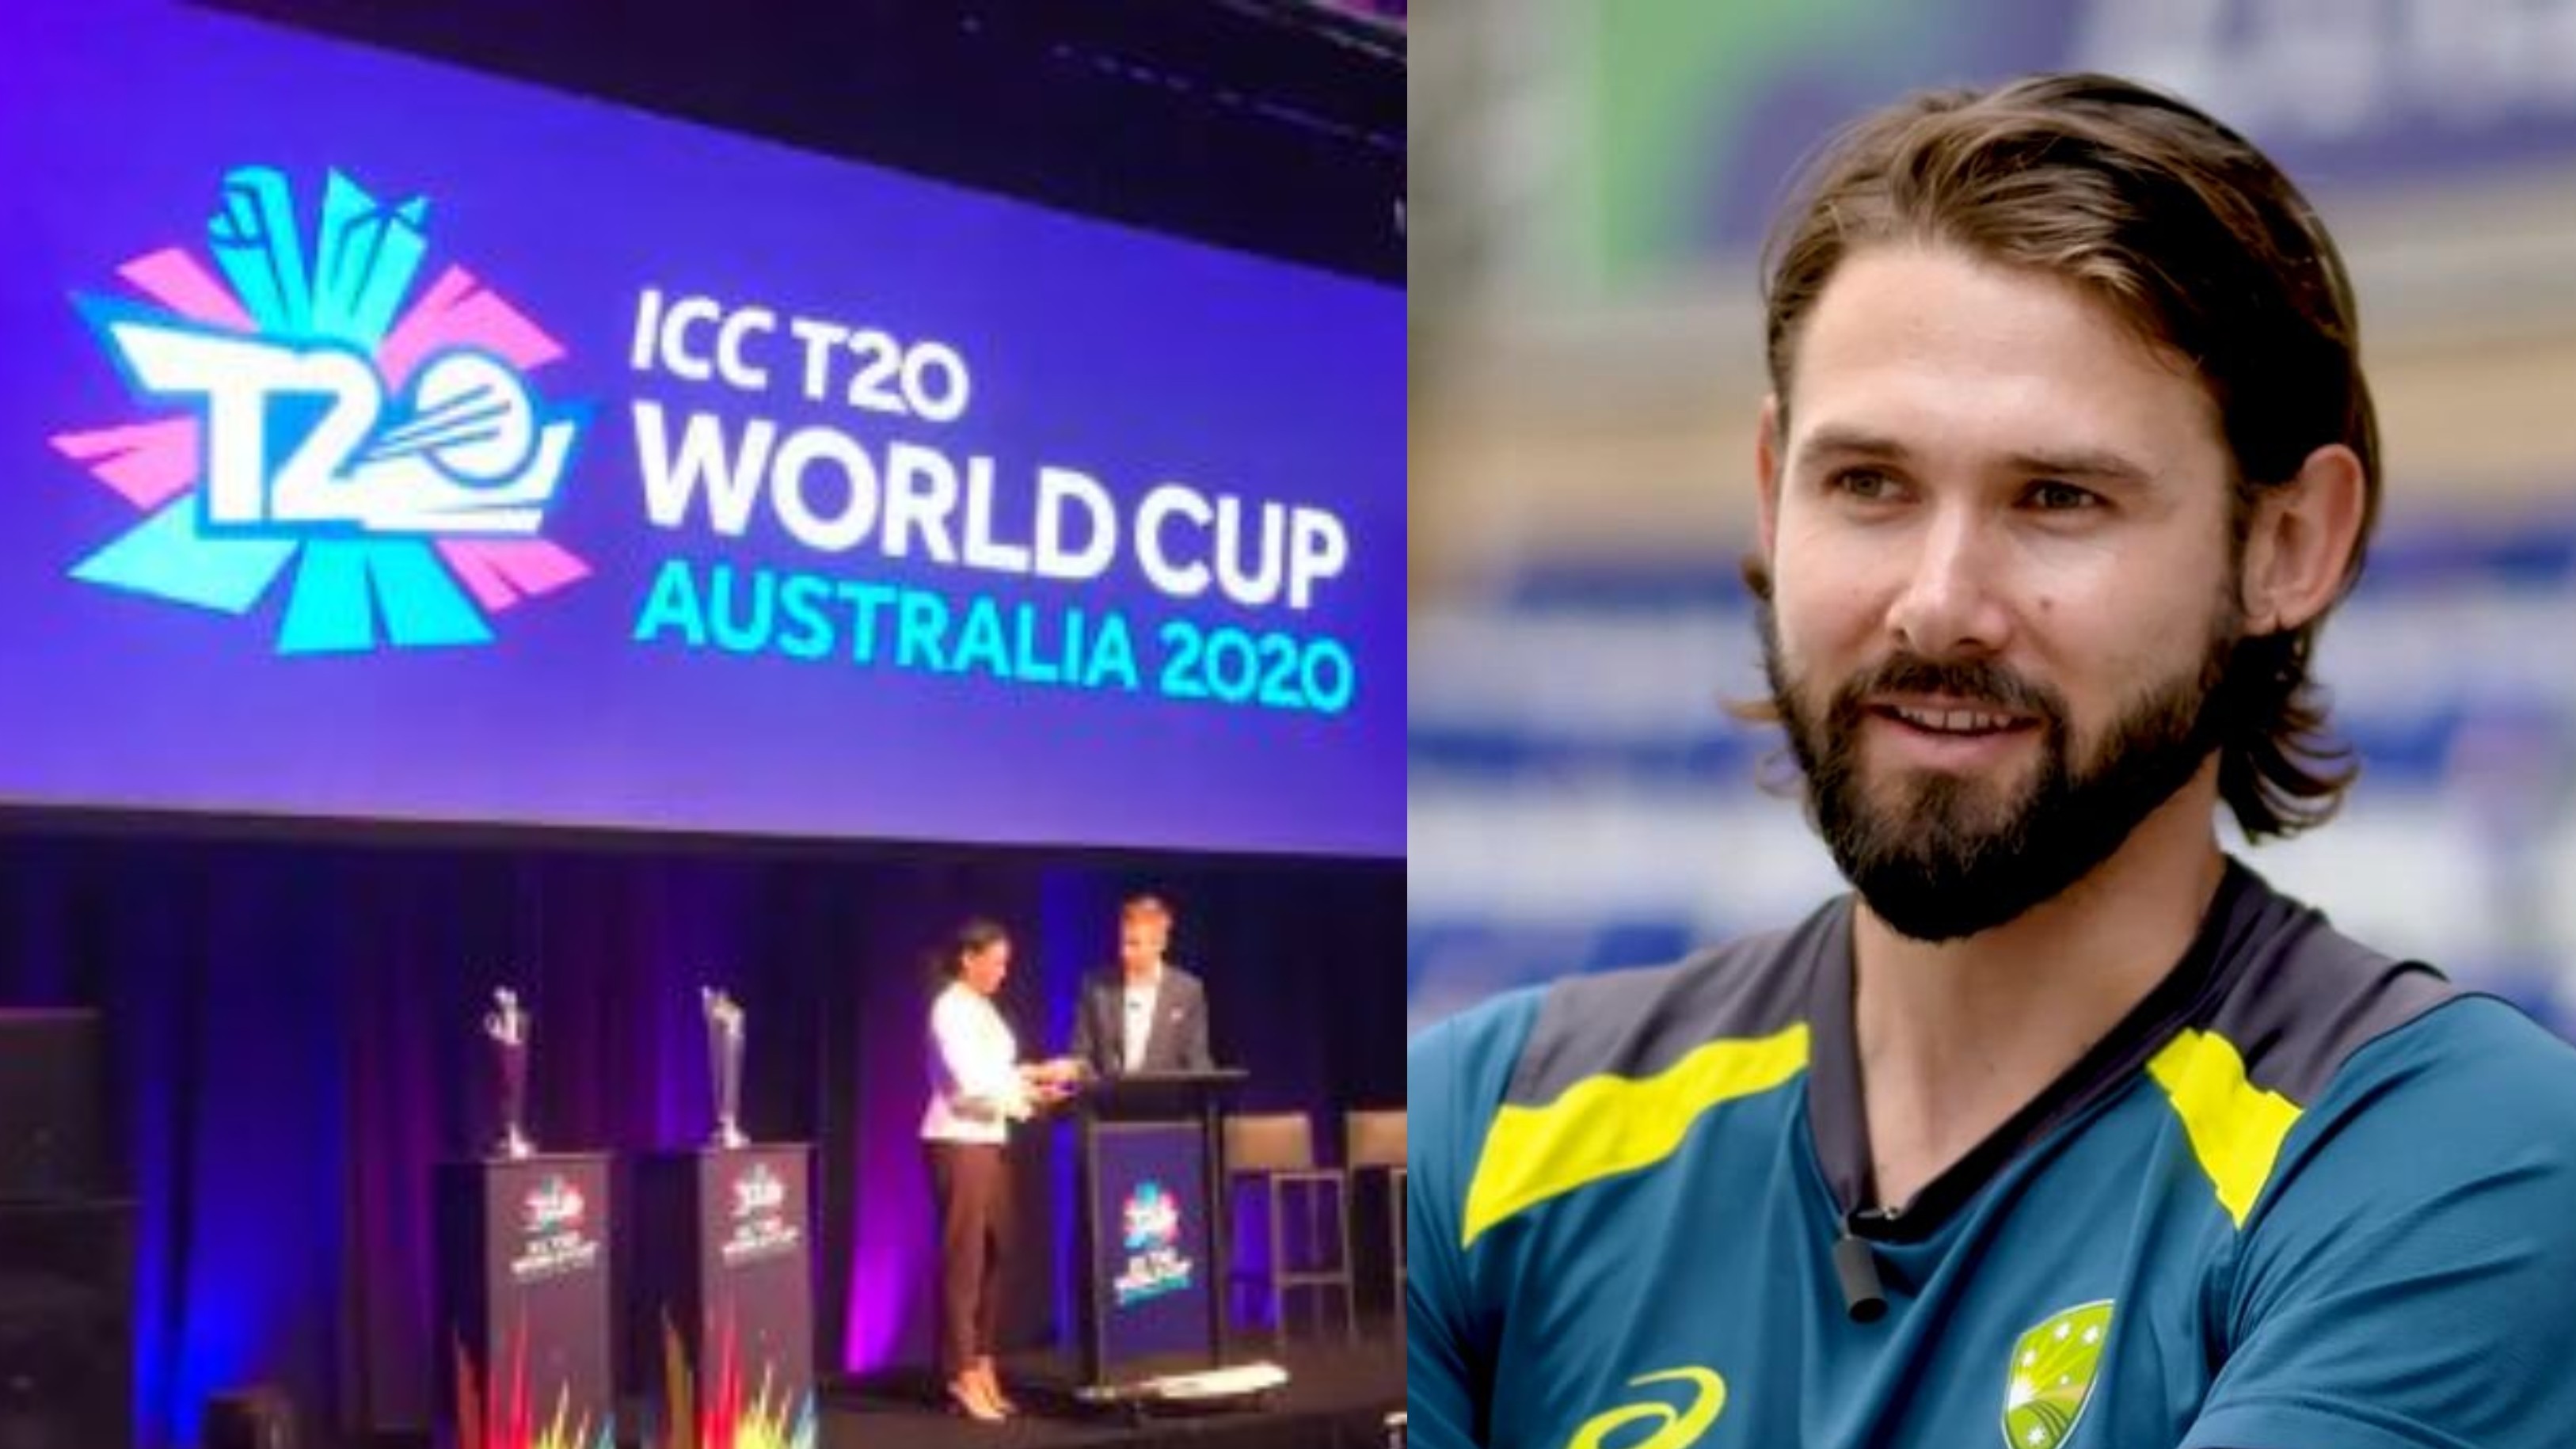 Kane Richardson backs ICC's call to delay decision on T20 World Cup 2020